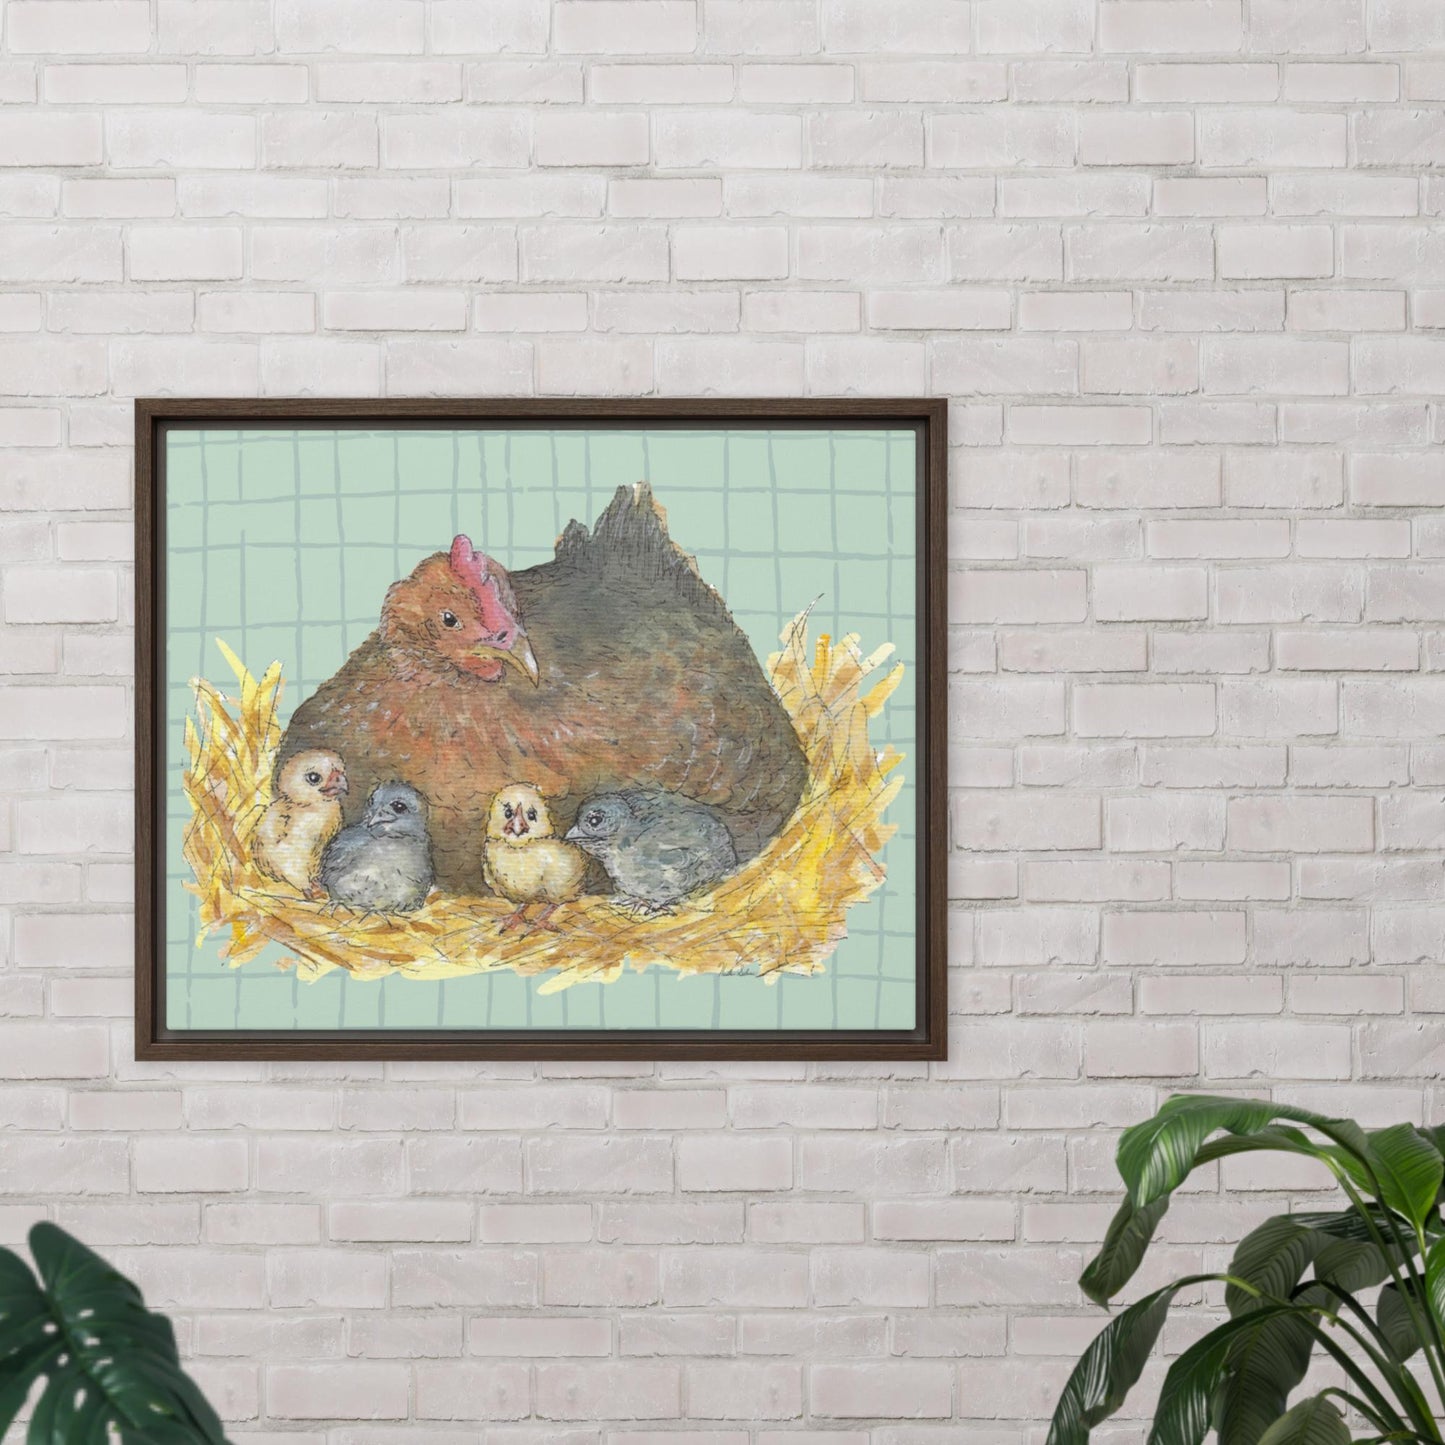 8 by 10 inch Mother Hen Floating Frame Canvas Wall Art. Heather Silver's watercolor painting, Mother Hen, with a green crosshatched background, printed on a stretched canvas and framed with a dark brown pine frame. Shown on white brick wall above potted plants.